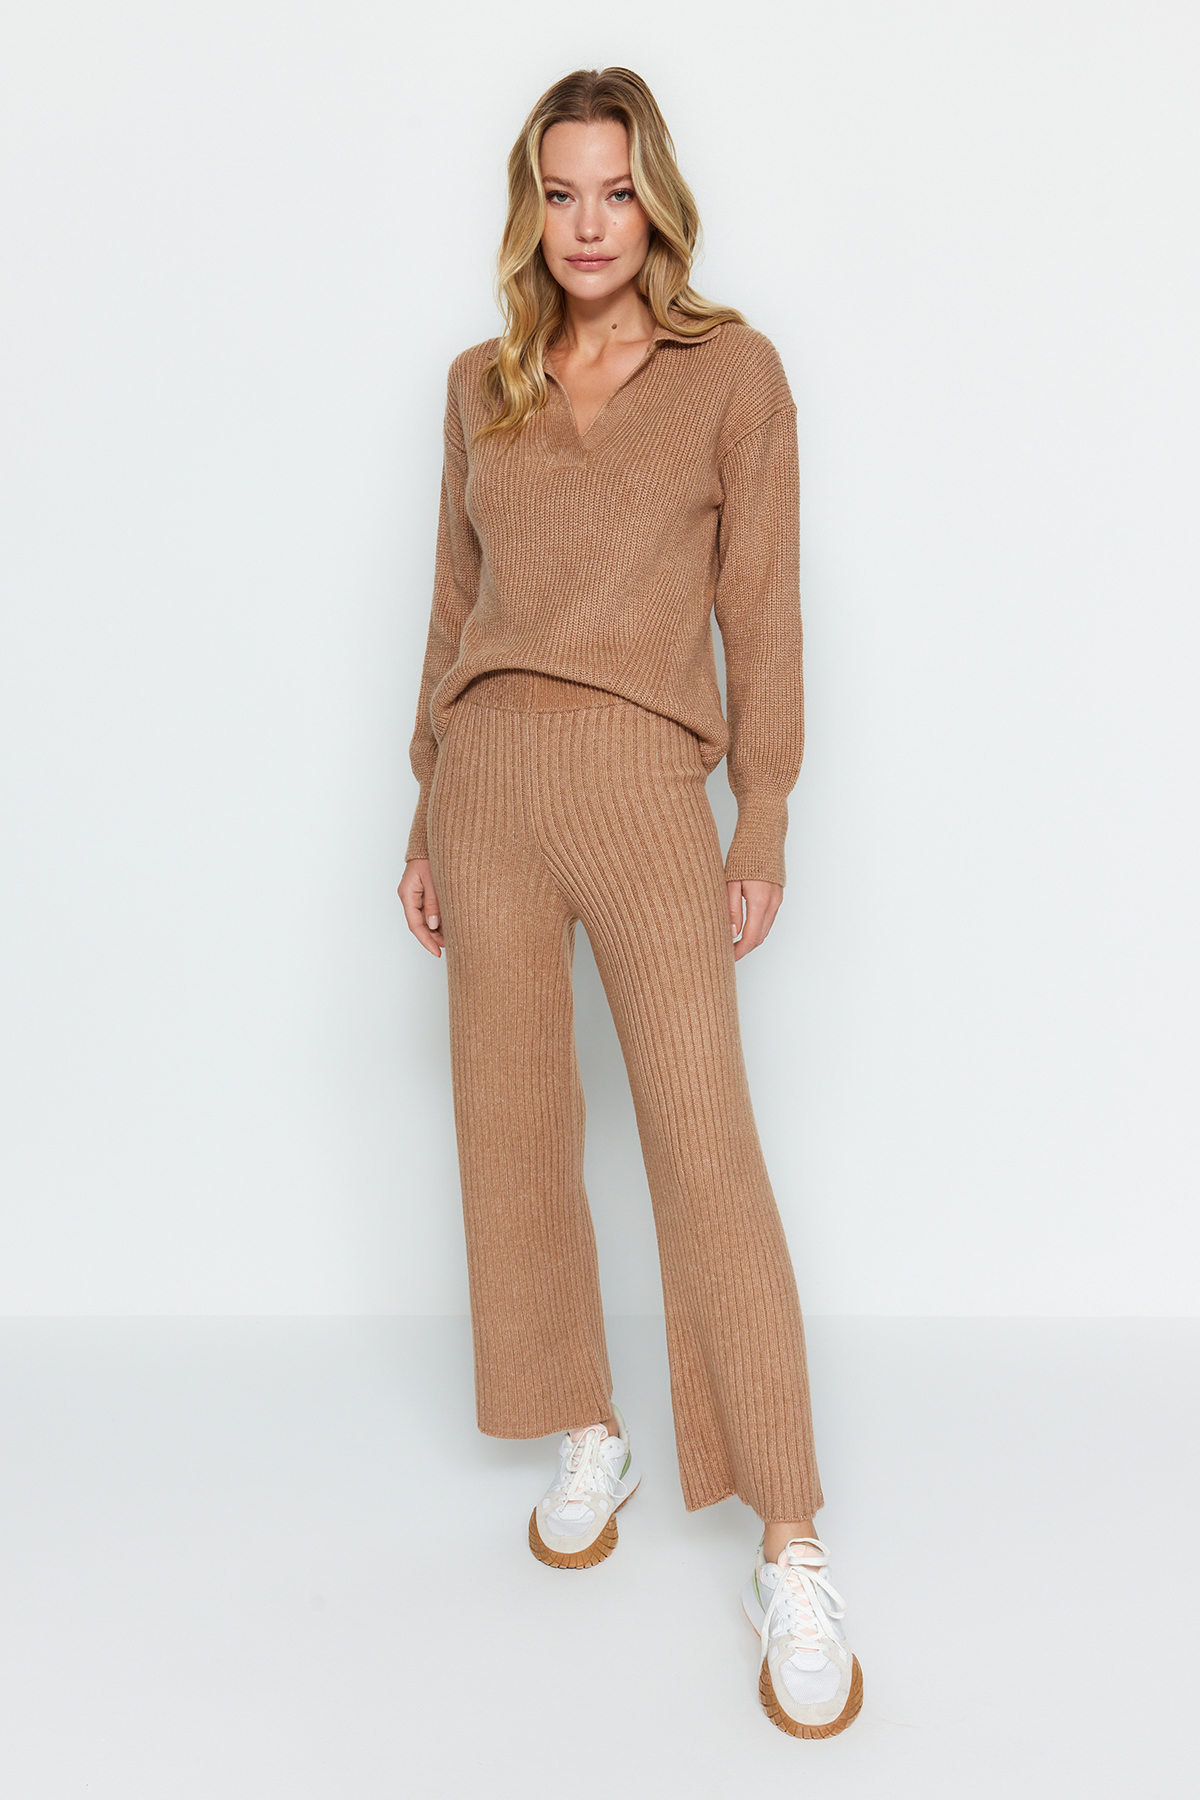 Trendyol Camel Care Collection Soft Textured Knitwear Top-Bottom Set